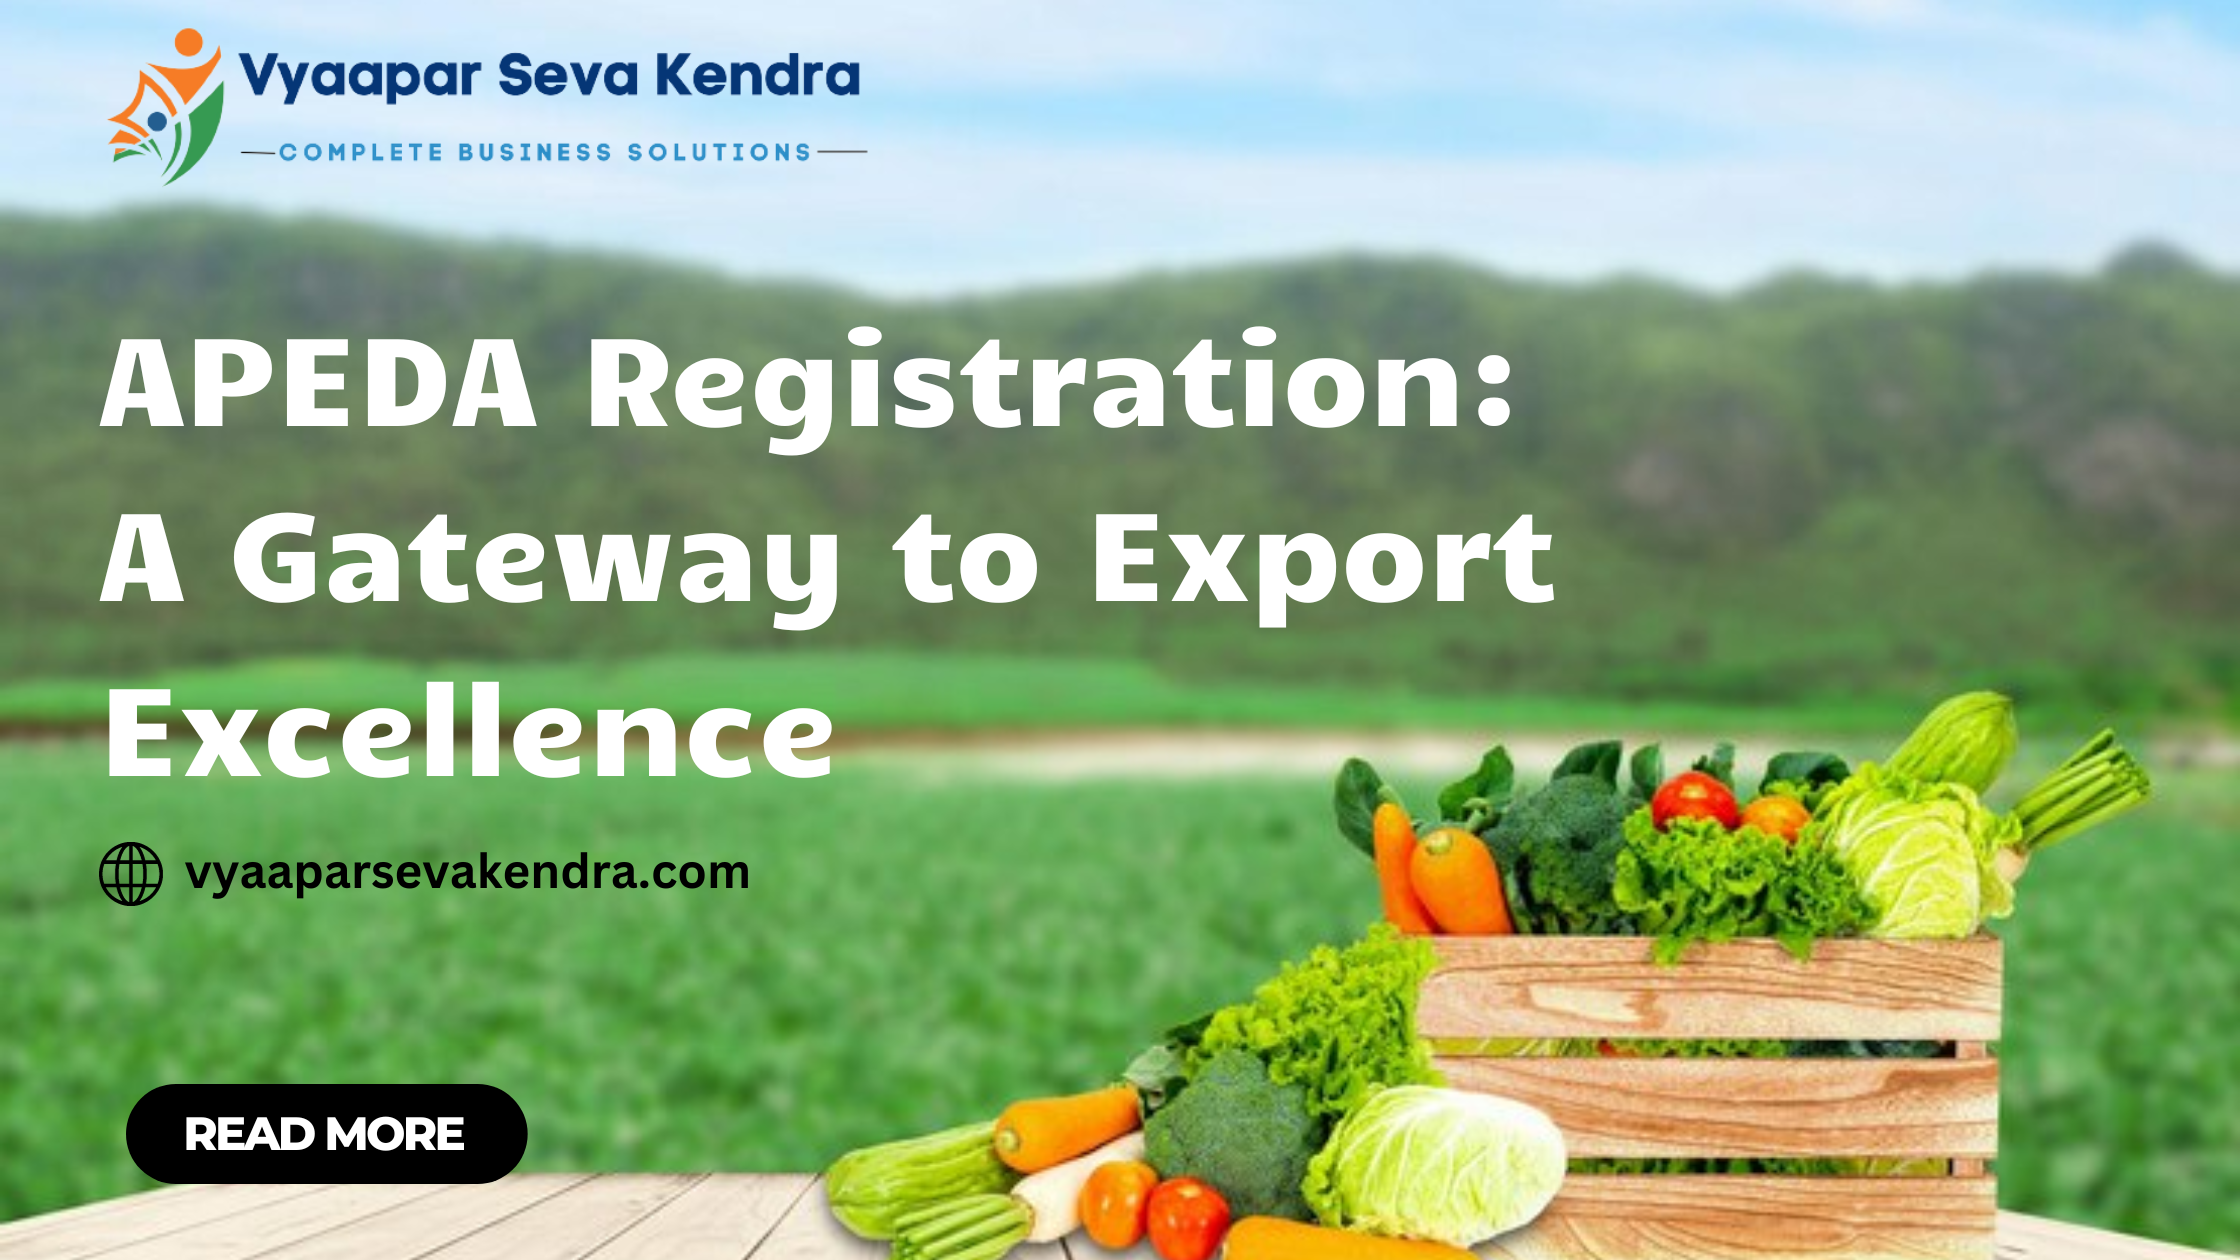 APEDA Registration: A Gateway to Export Excellence